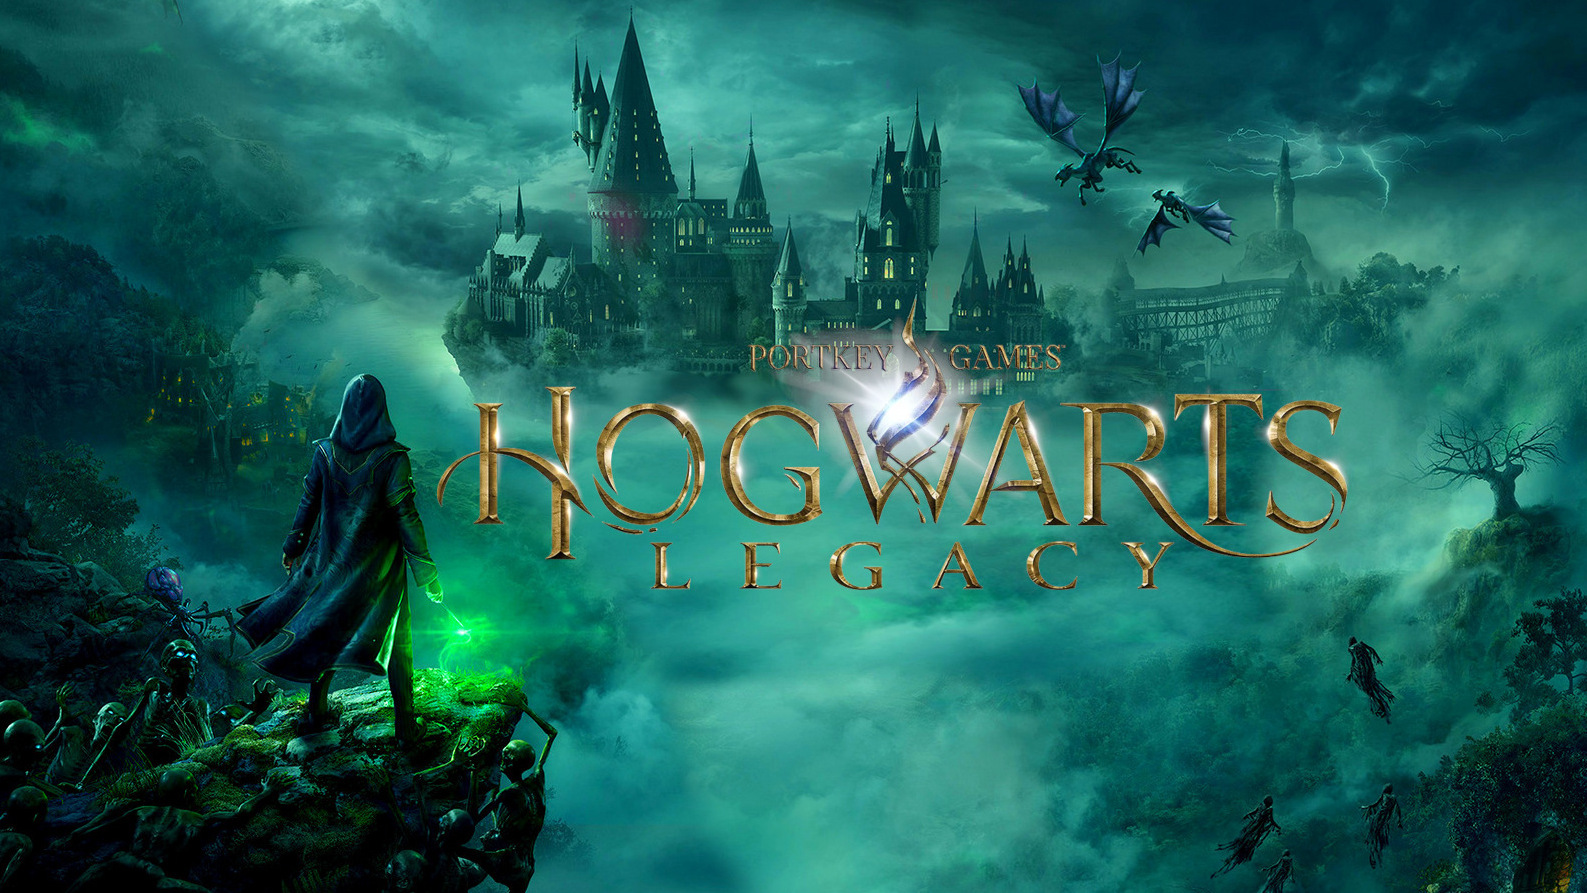 Hogwarts Legacy breaks records: 12 million copies sold, $850 million in revenue and a Twitch record